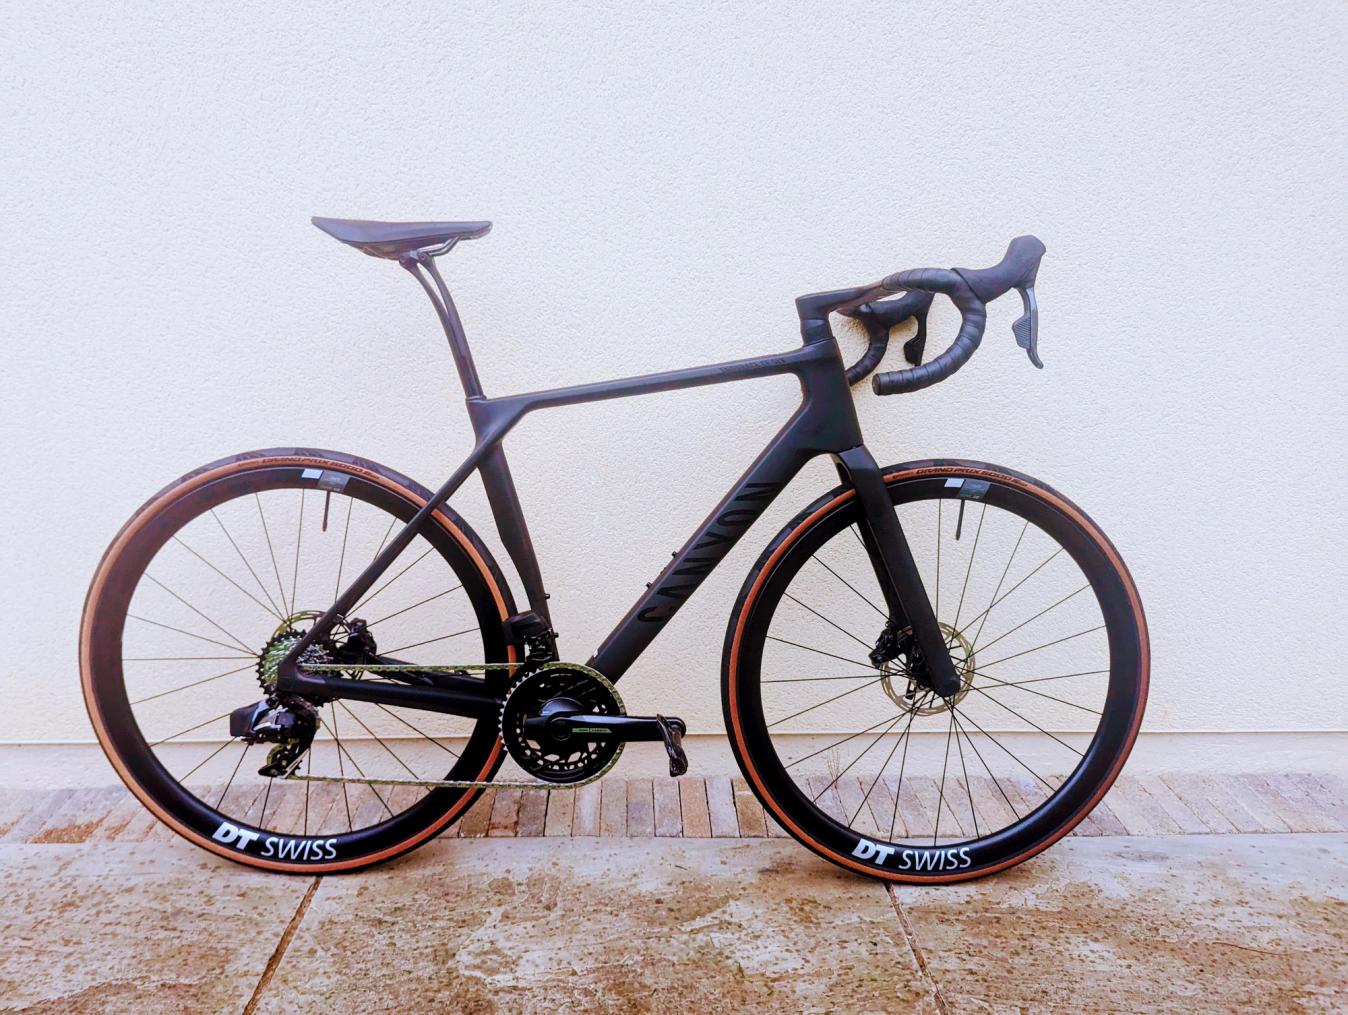 Our judges didn't have to deliberate long before giving this Canyon CF SLX8 a big thumbs up